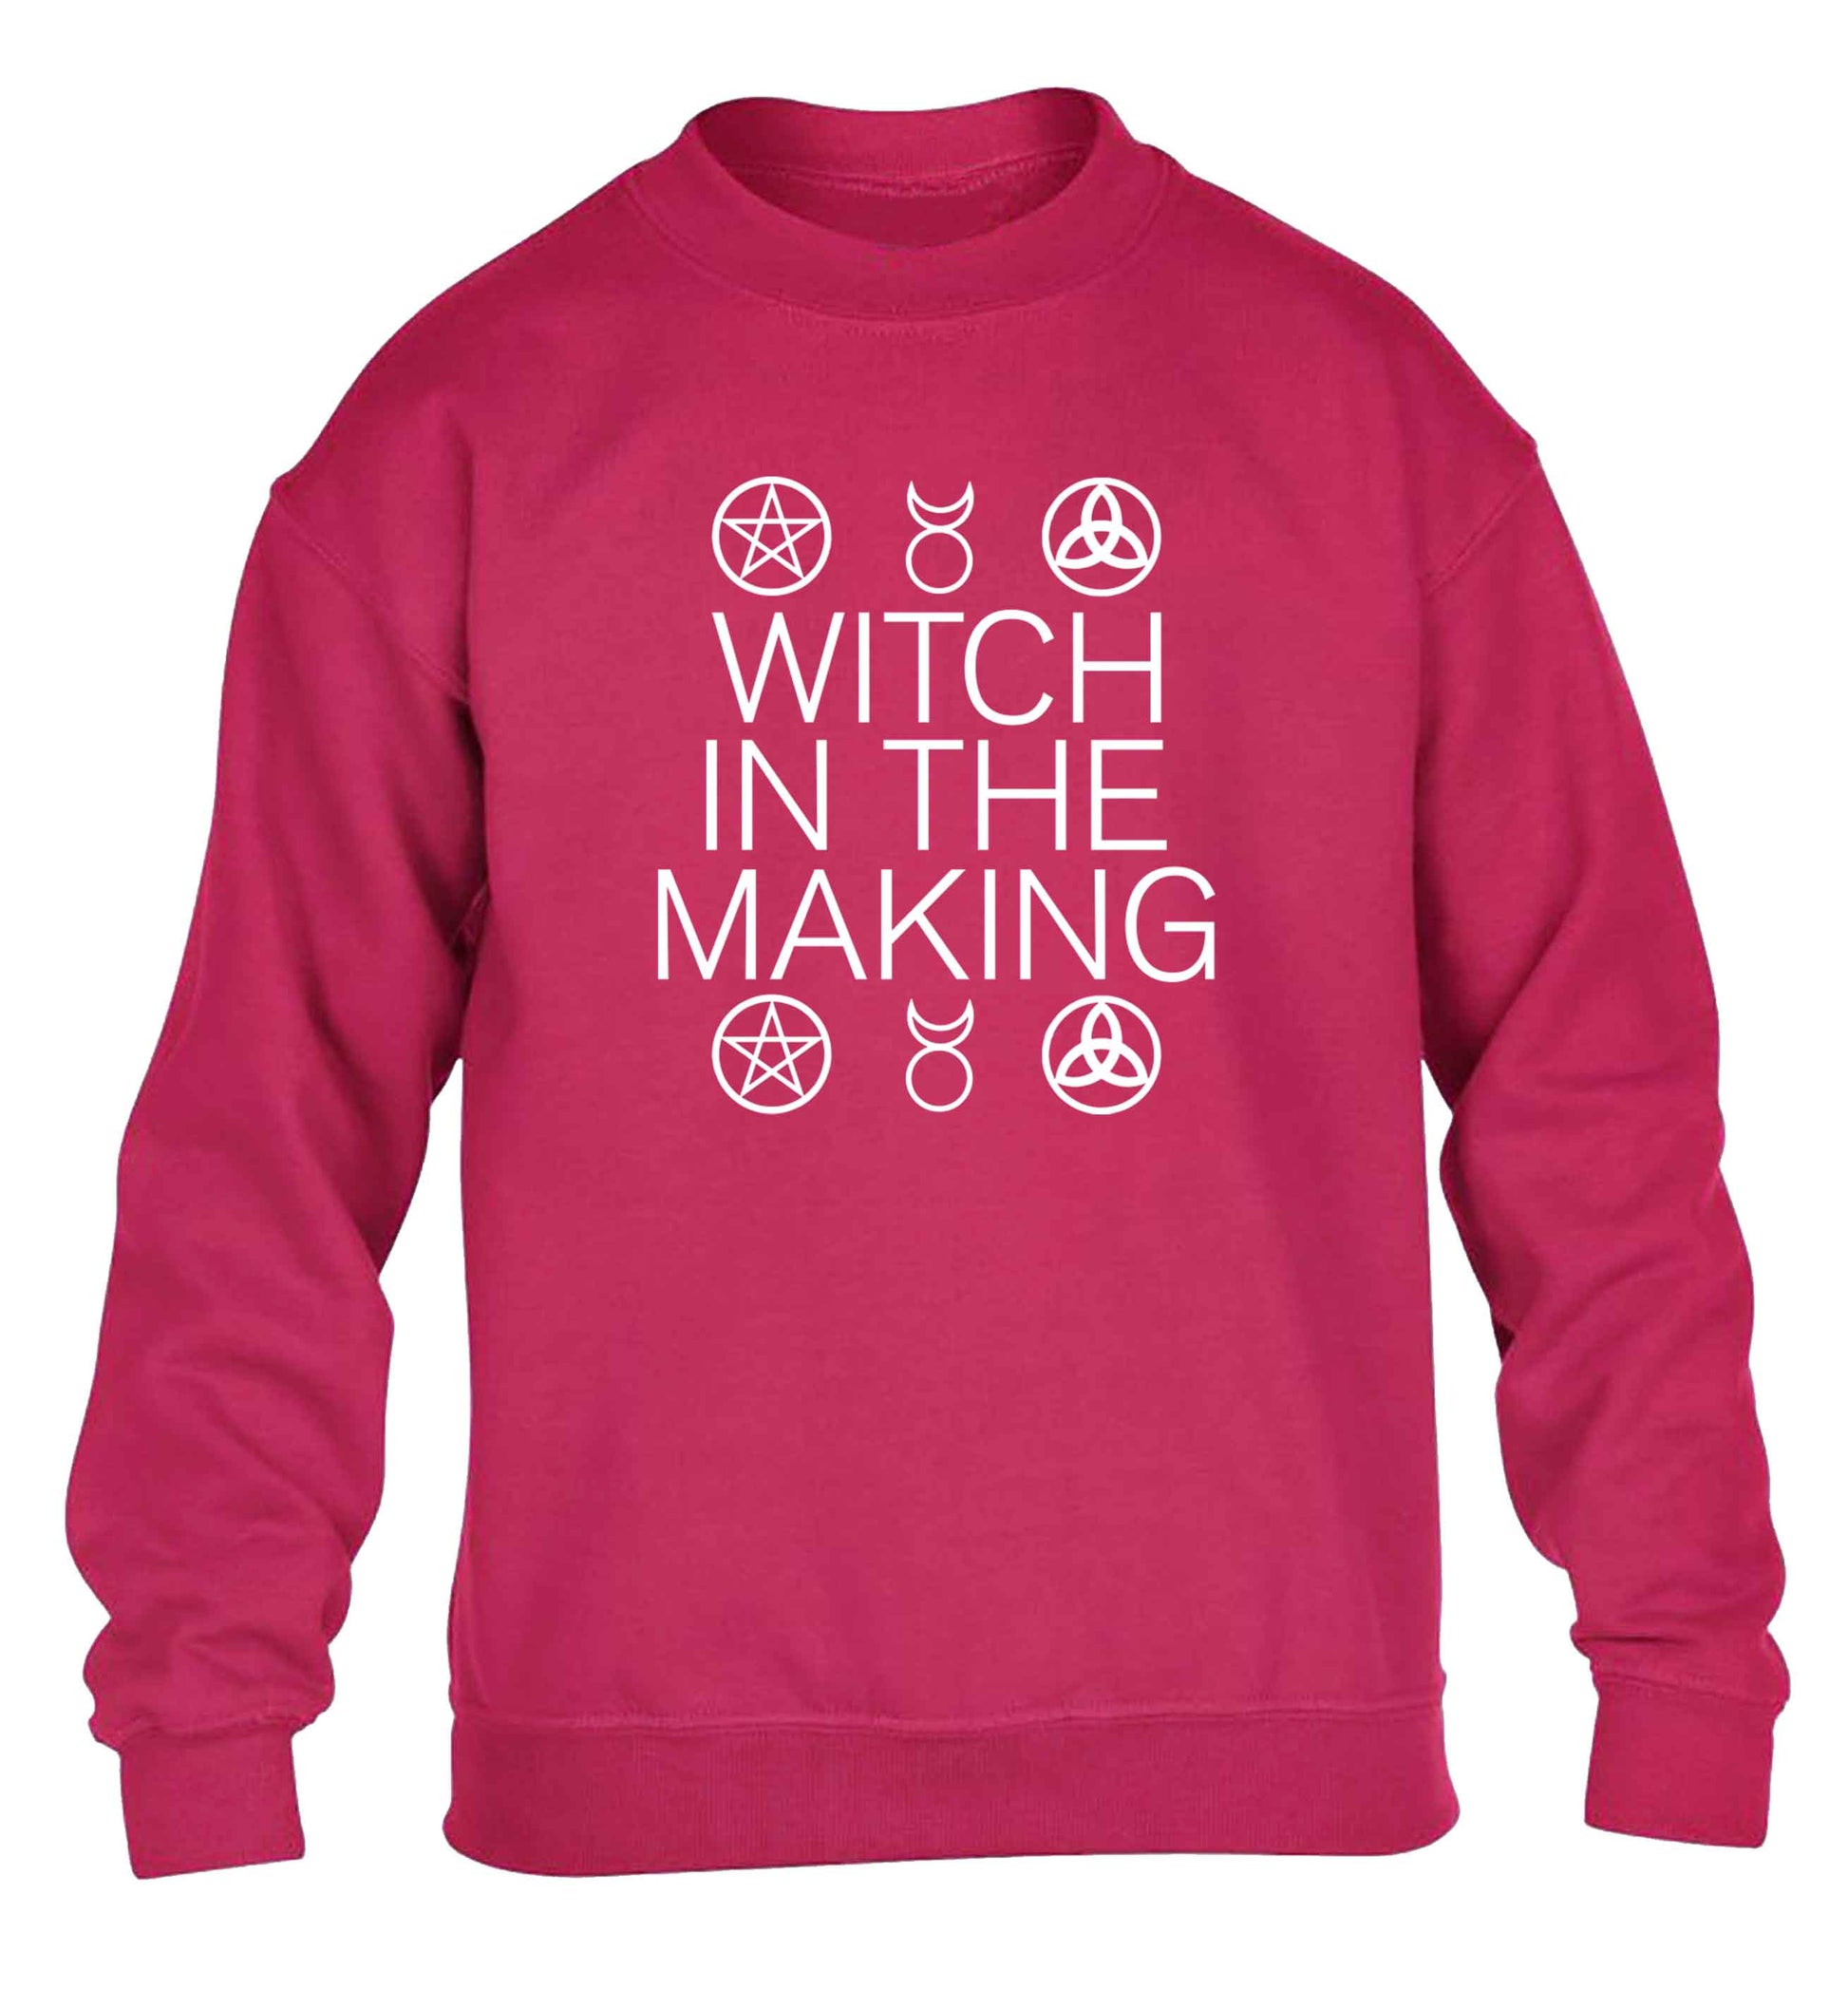 Witch in the making children's pink sweater 12-13 Years